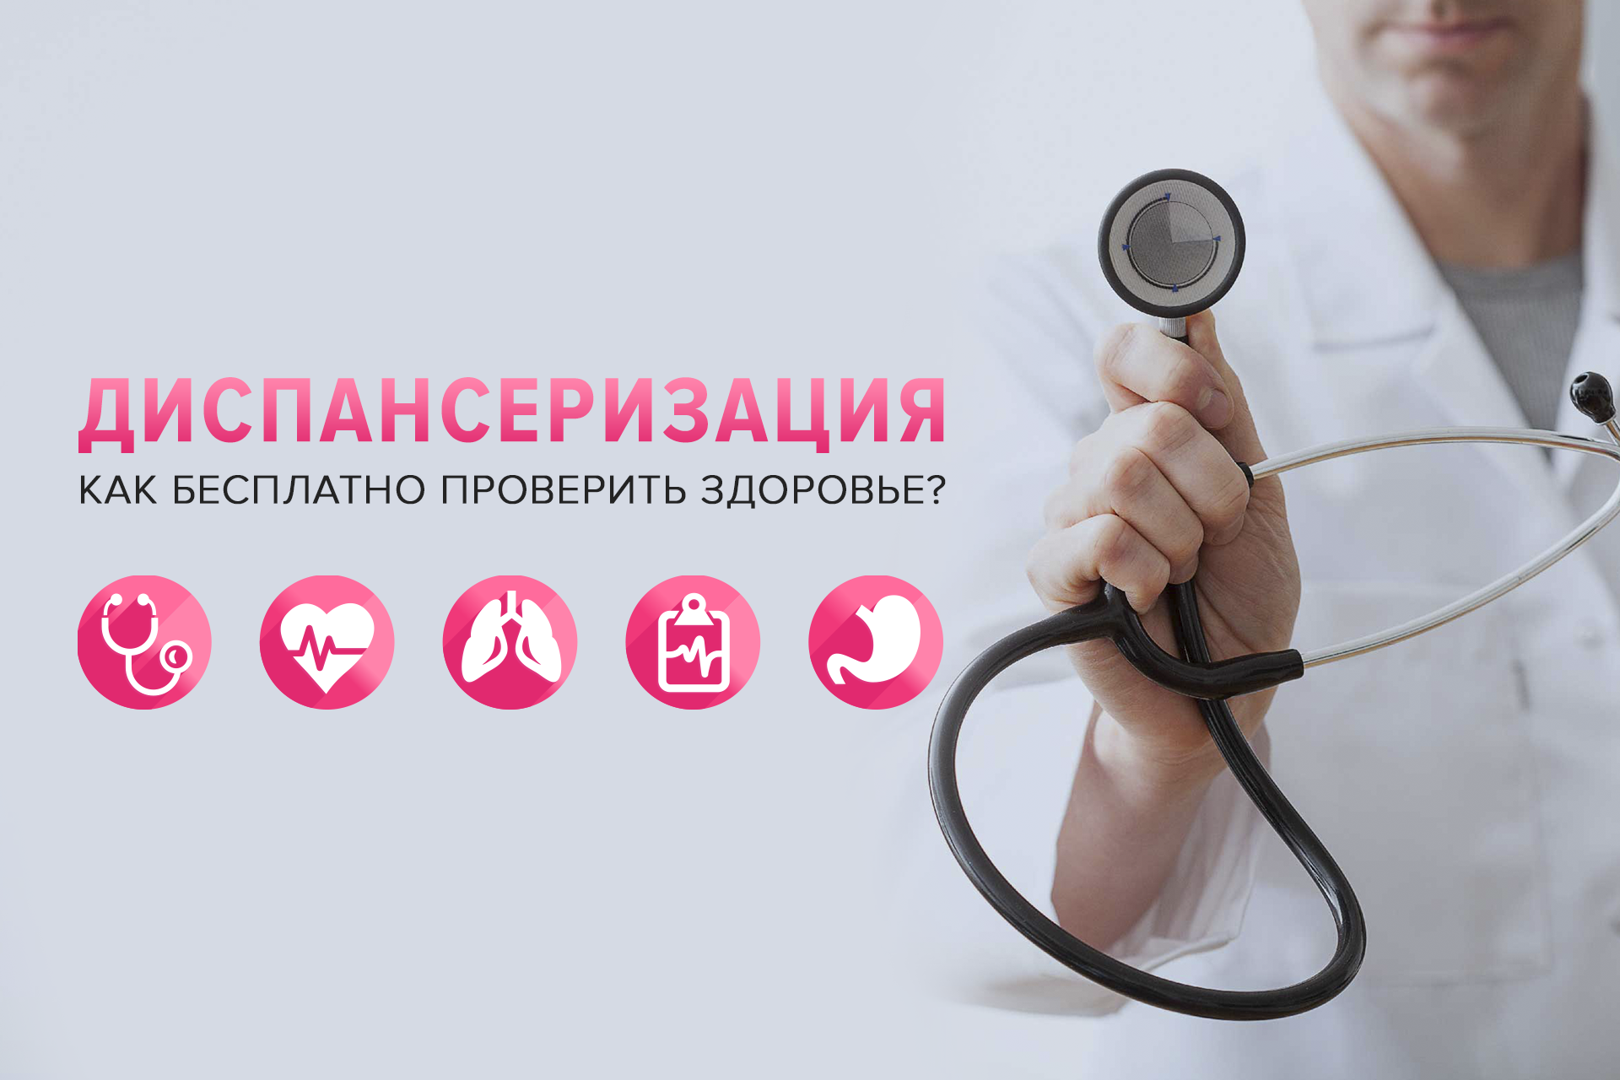 Medical examination of the population